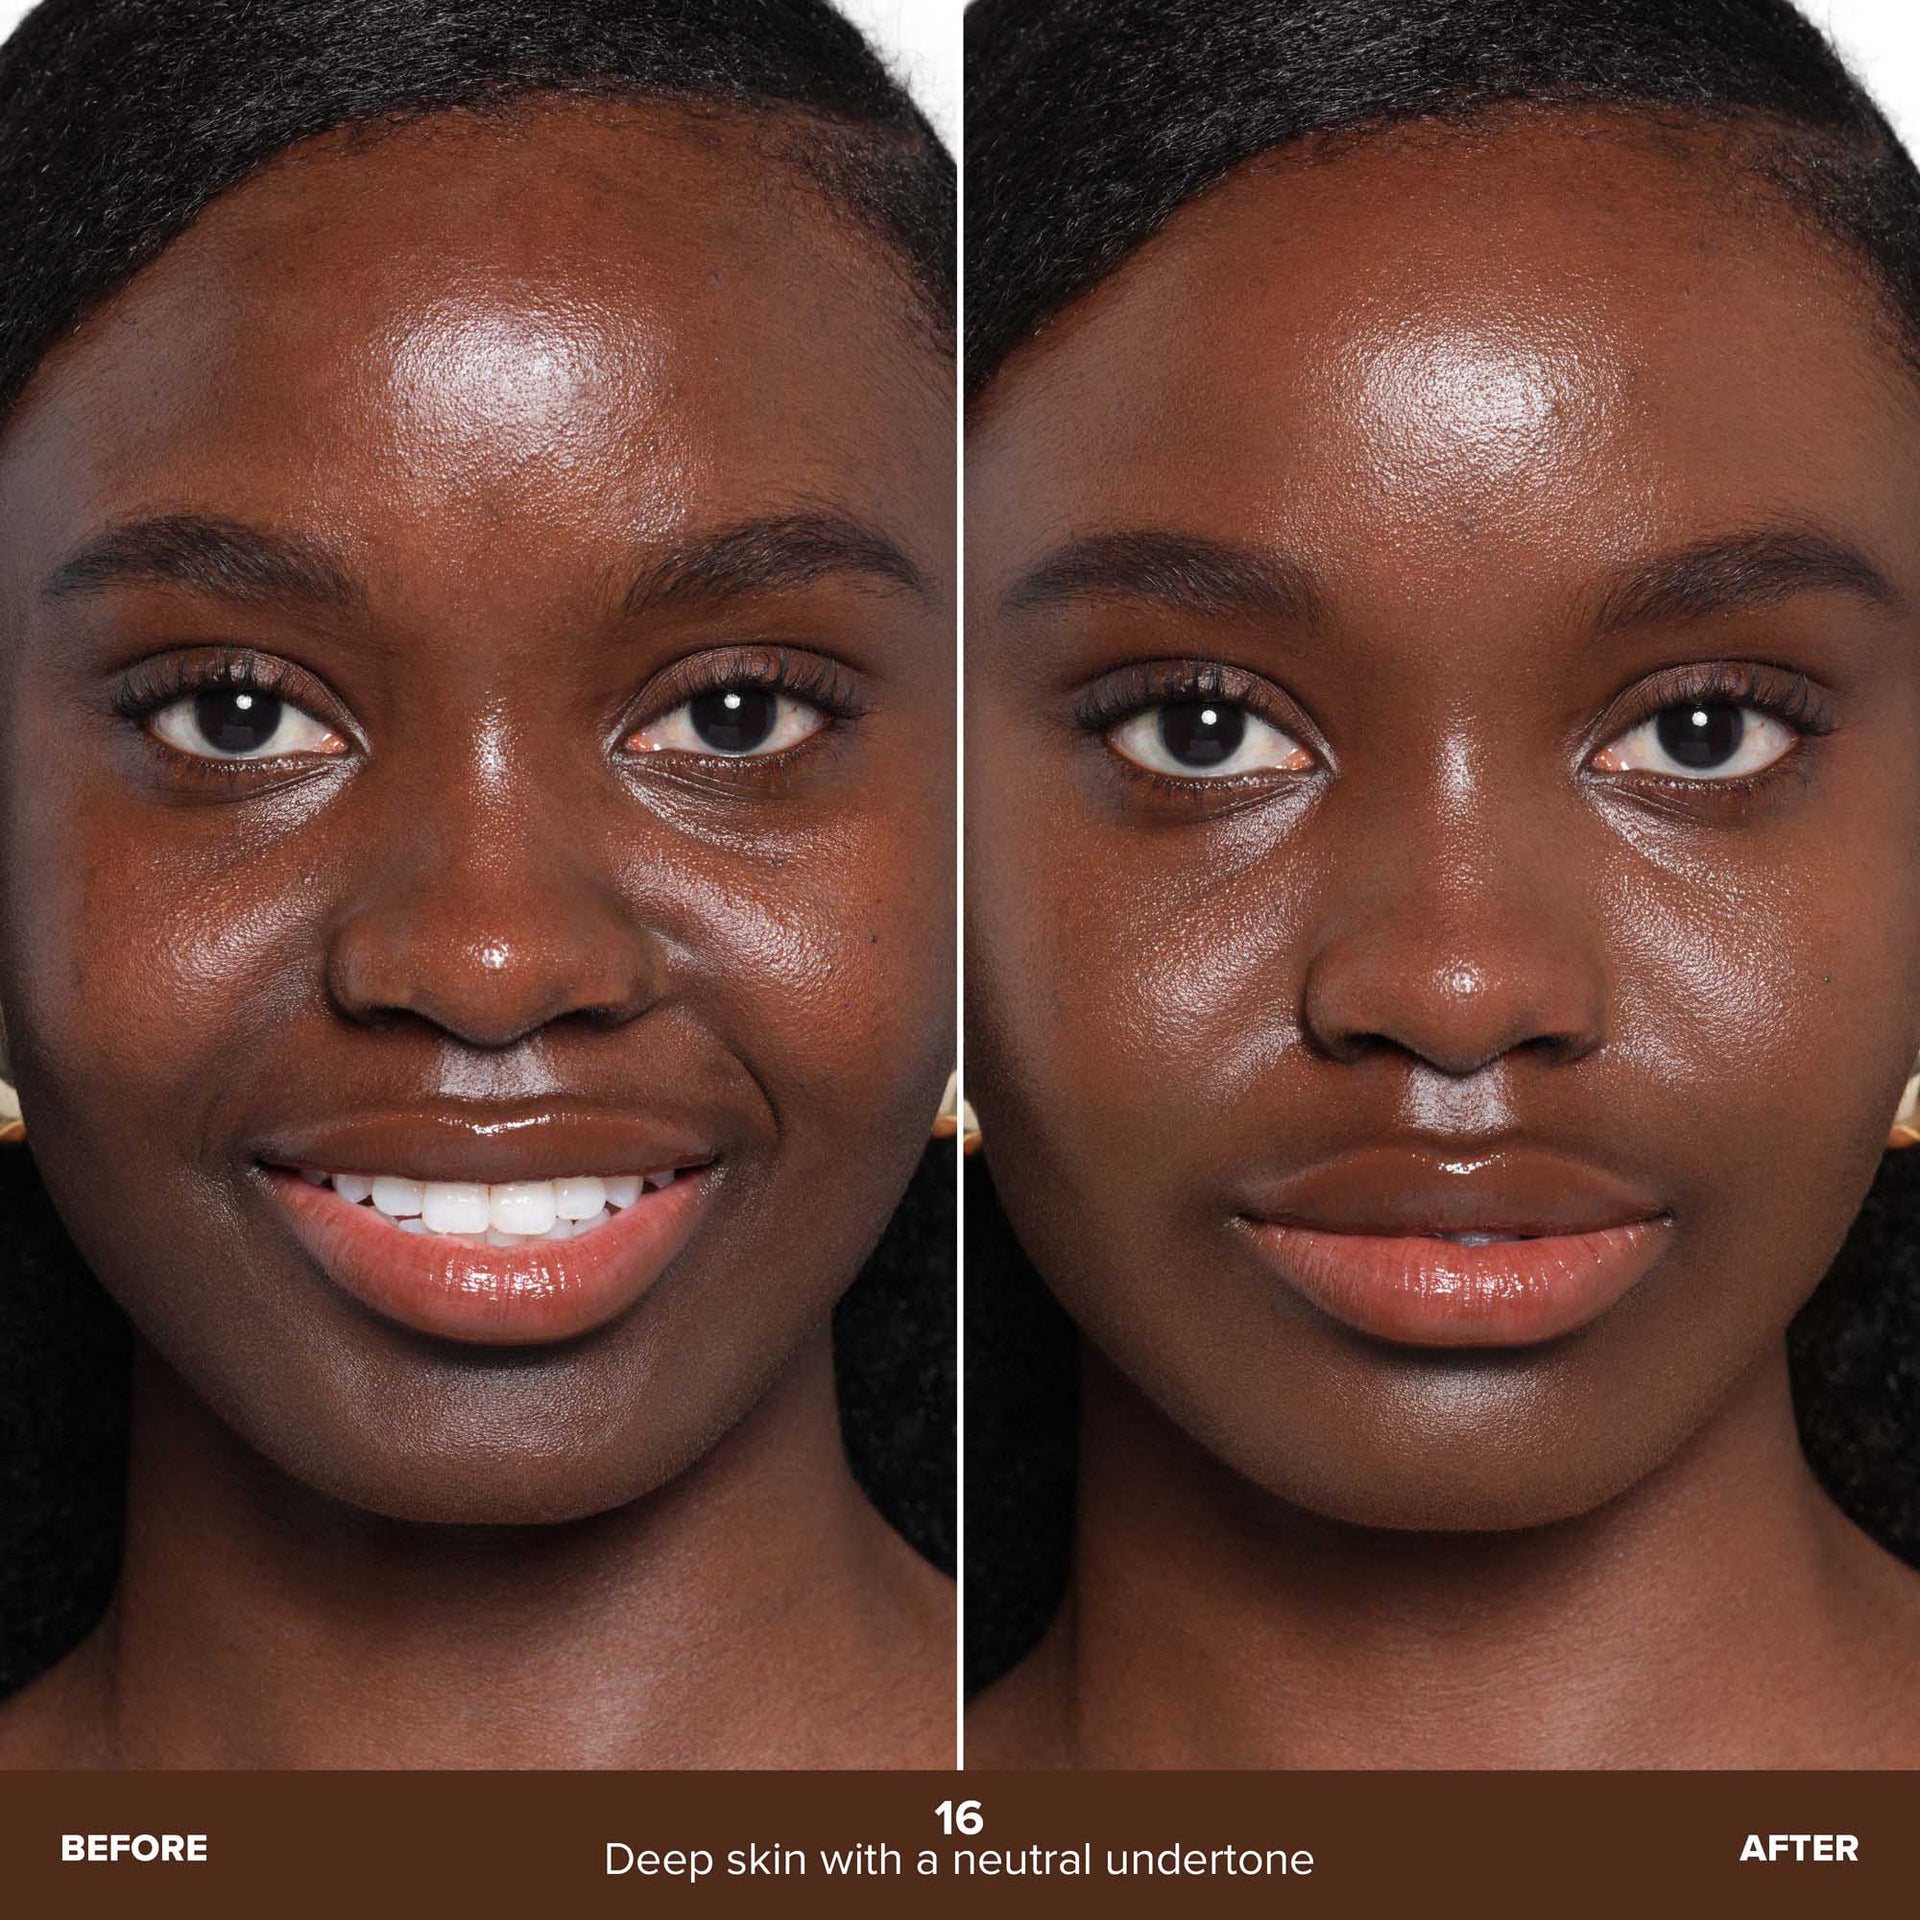 Shade 16 | Beauty Balm Serum Boosted Skin Tint Before & After - Shade 16